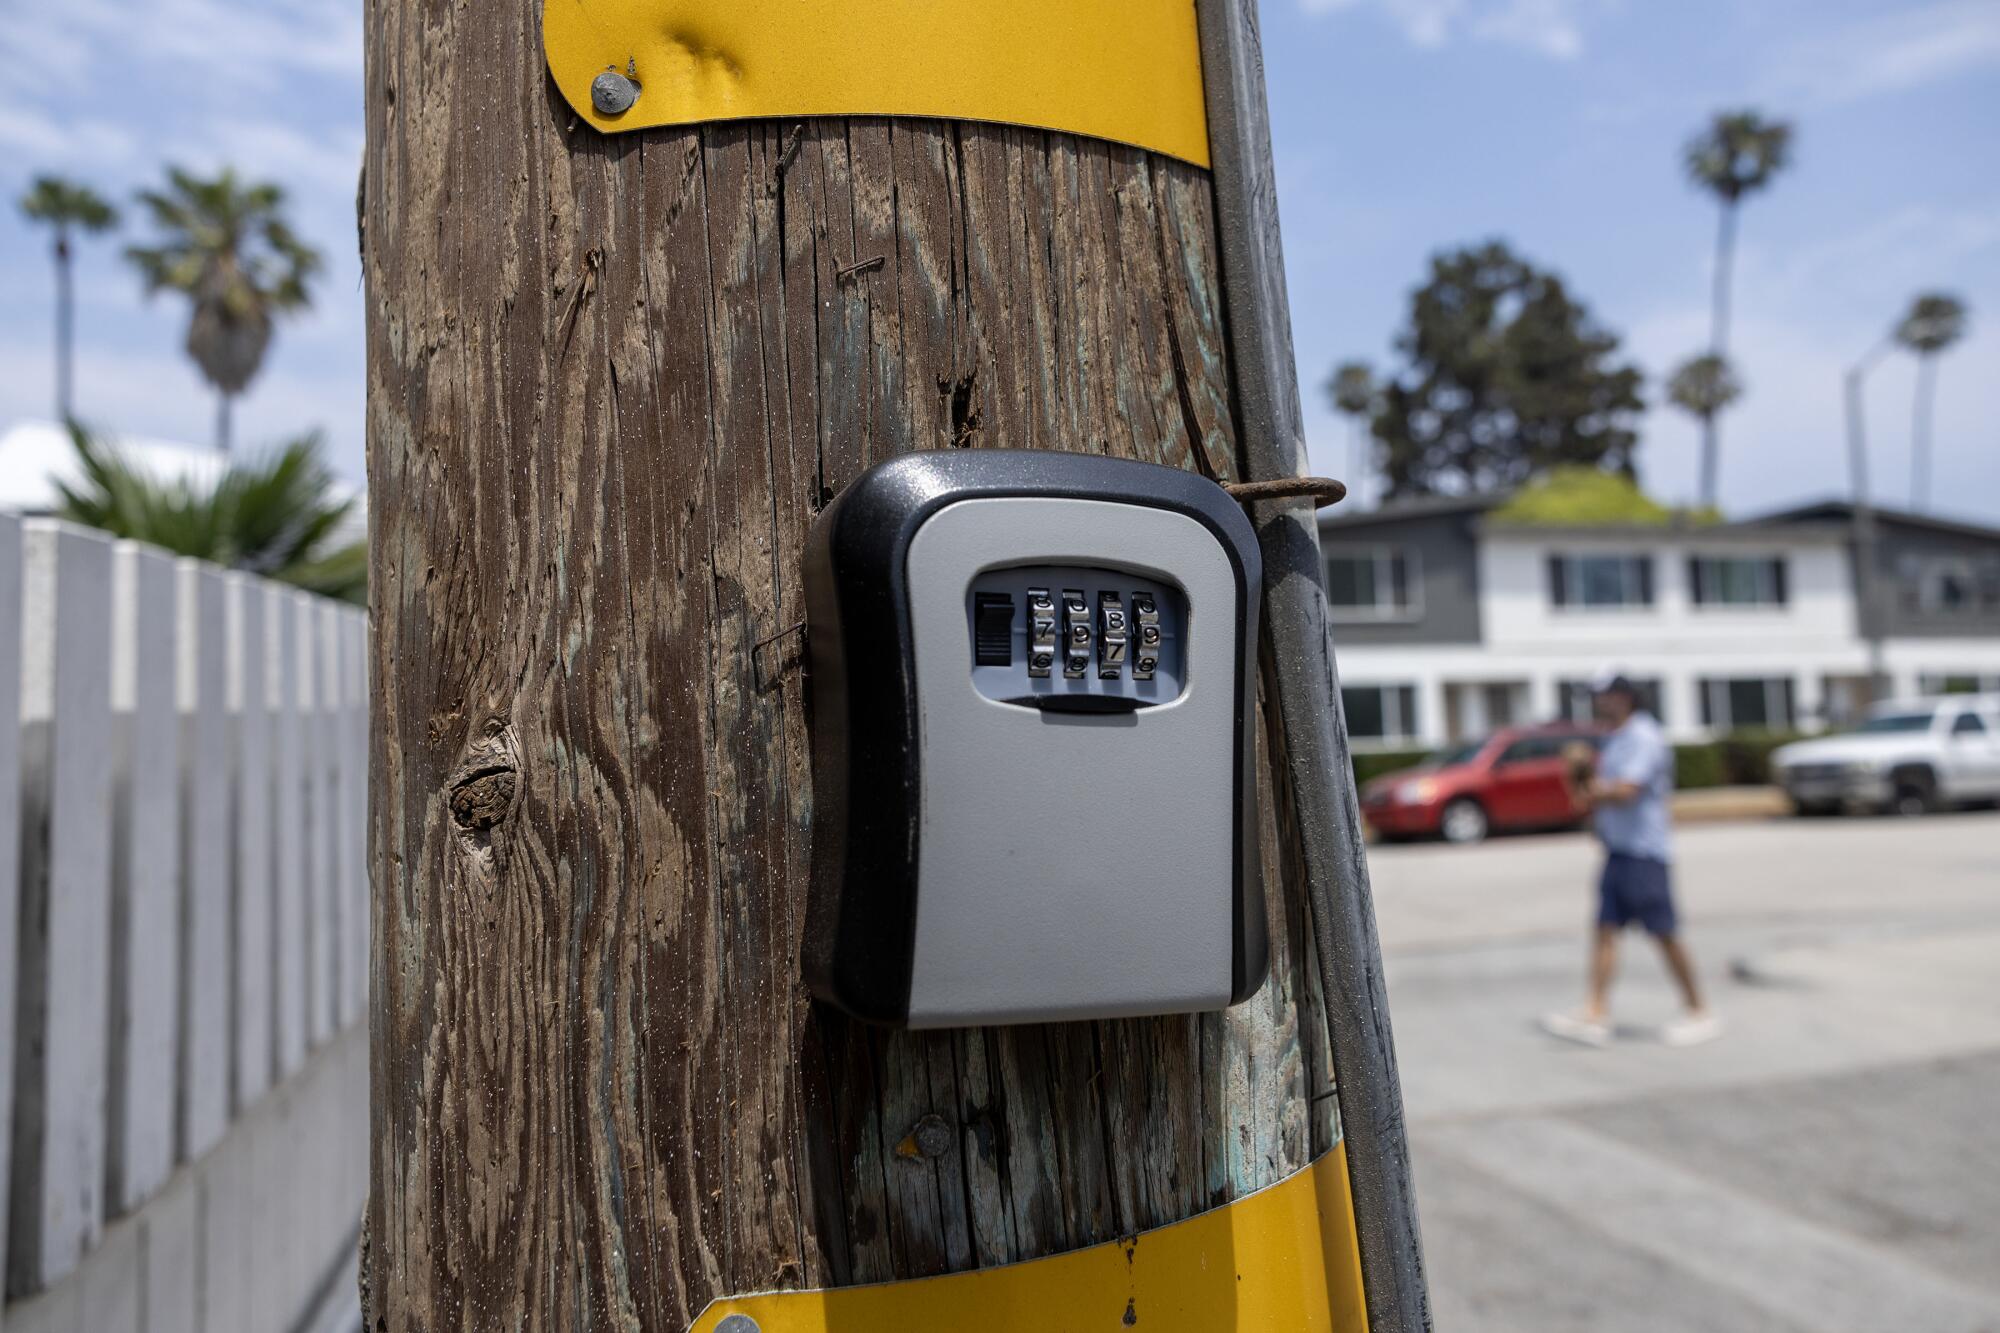 A combination lockbox for holding keys is fixed to a wooden utility pole.